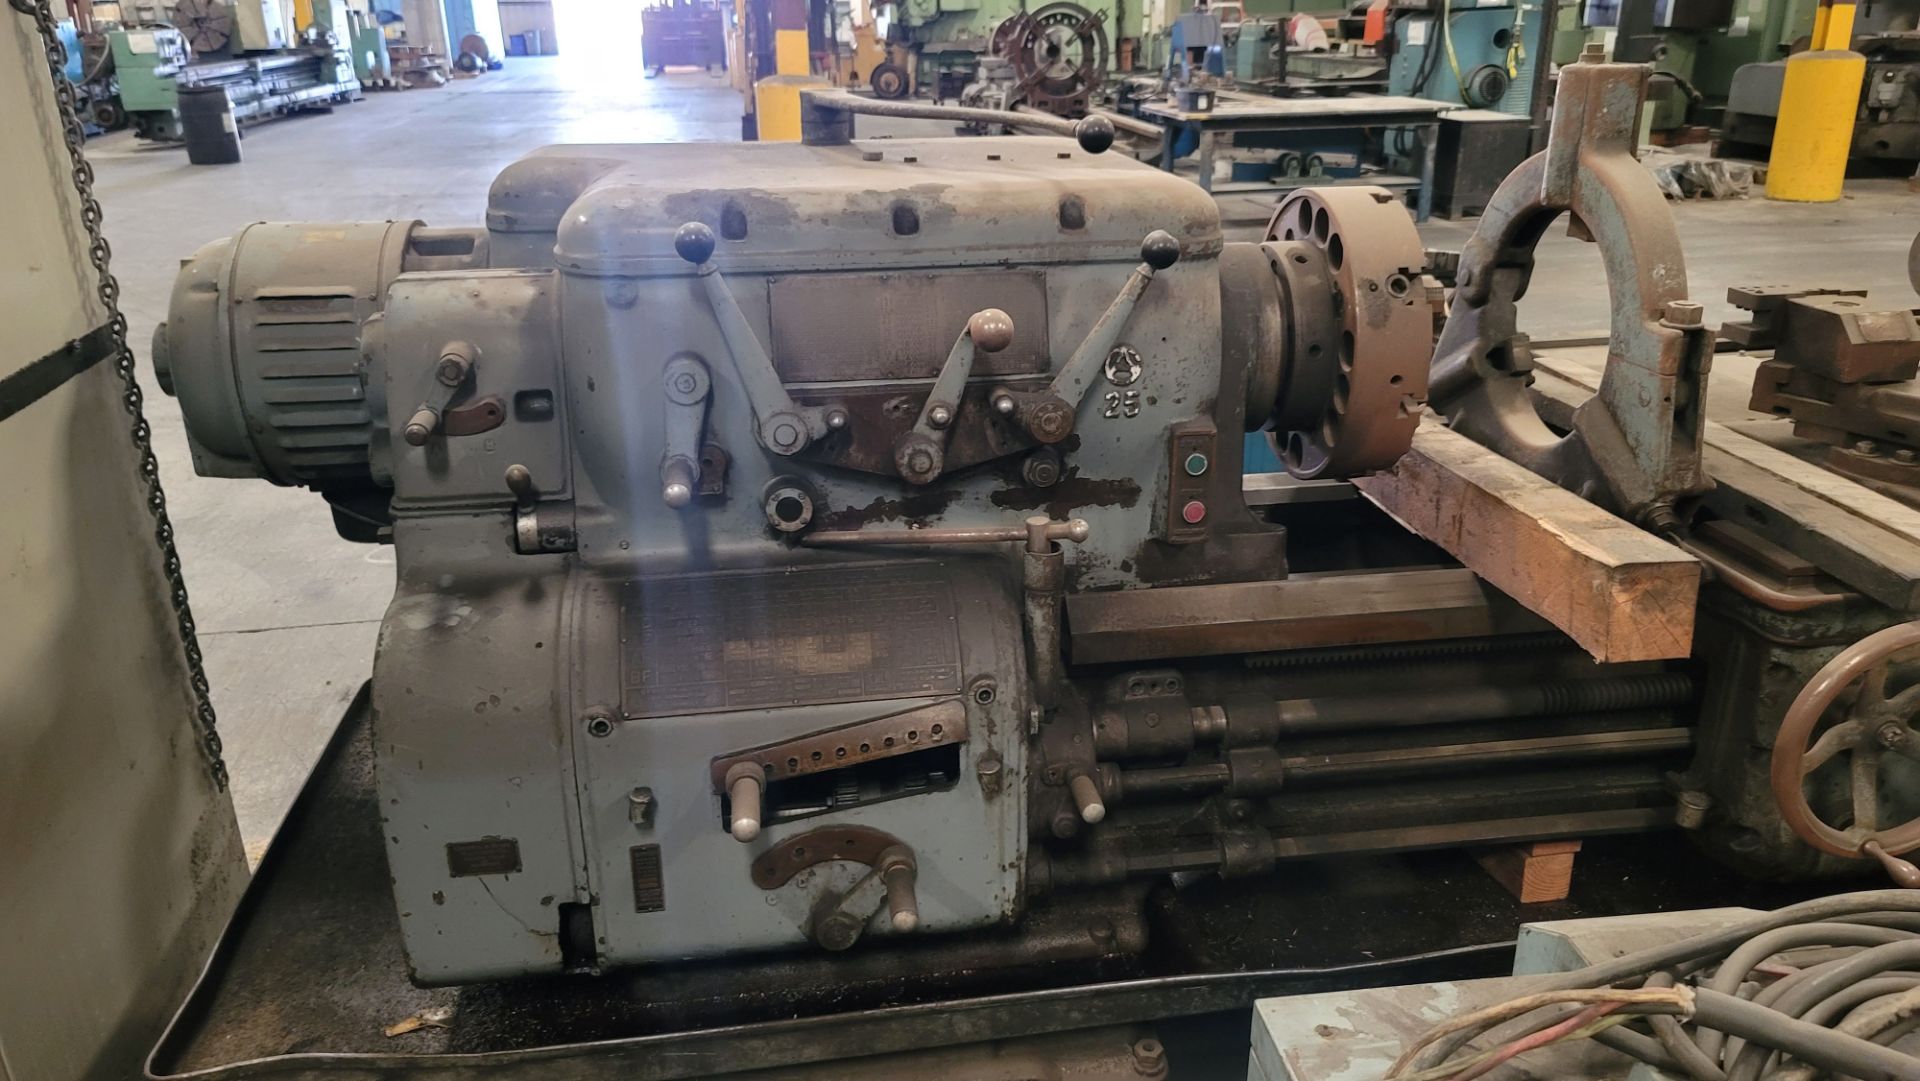 AXELSON A25 ENGINE LATHE, 18" CHUCK, 25" X 120" - Image 8 of 9